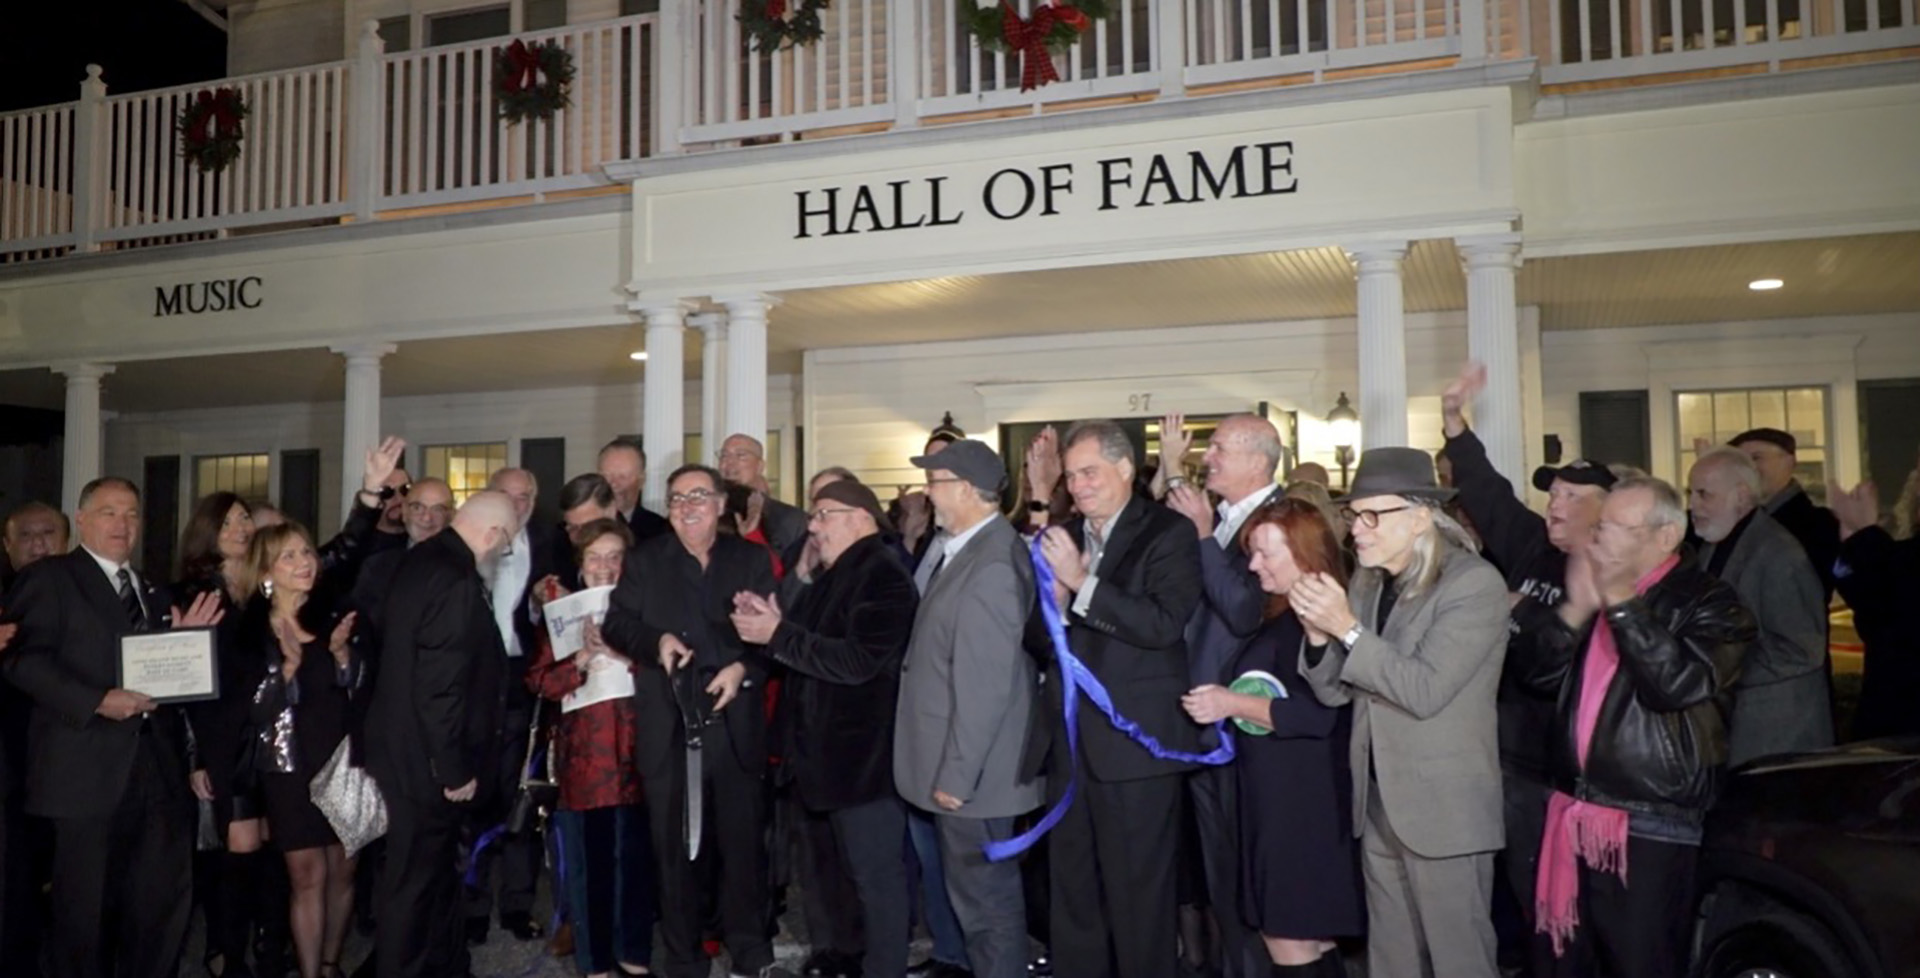 The Long Island Music & Entertainment Hall of Fame Now Open to the Public